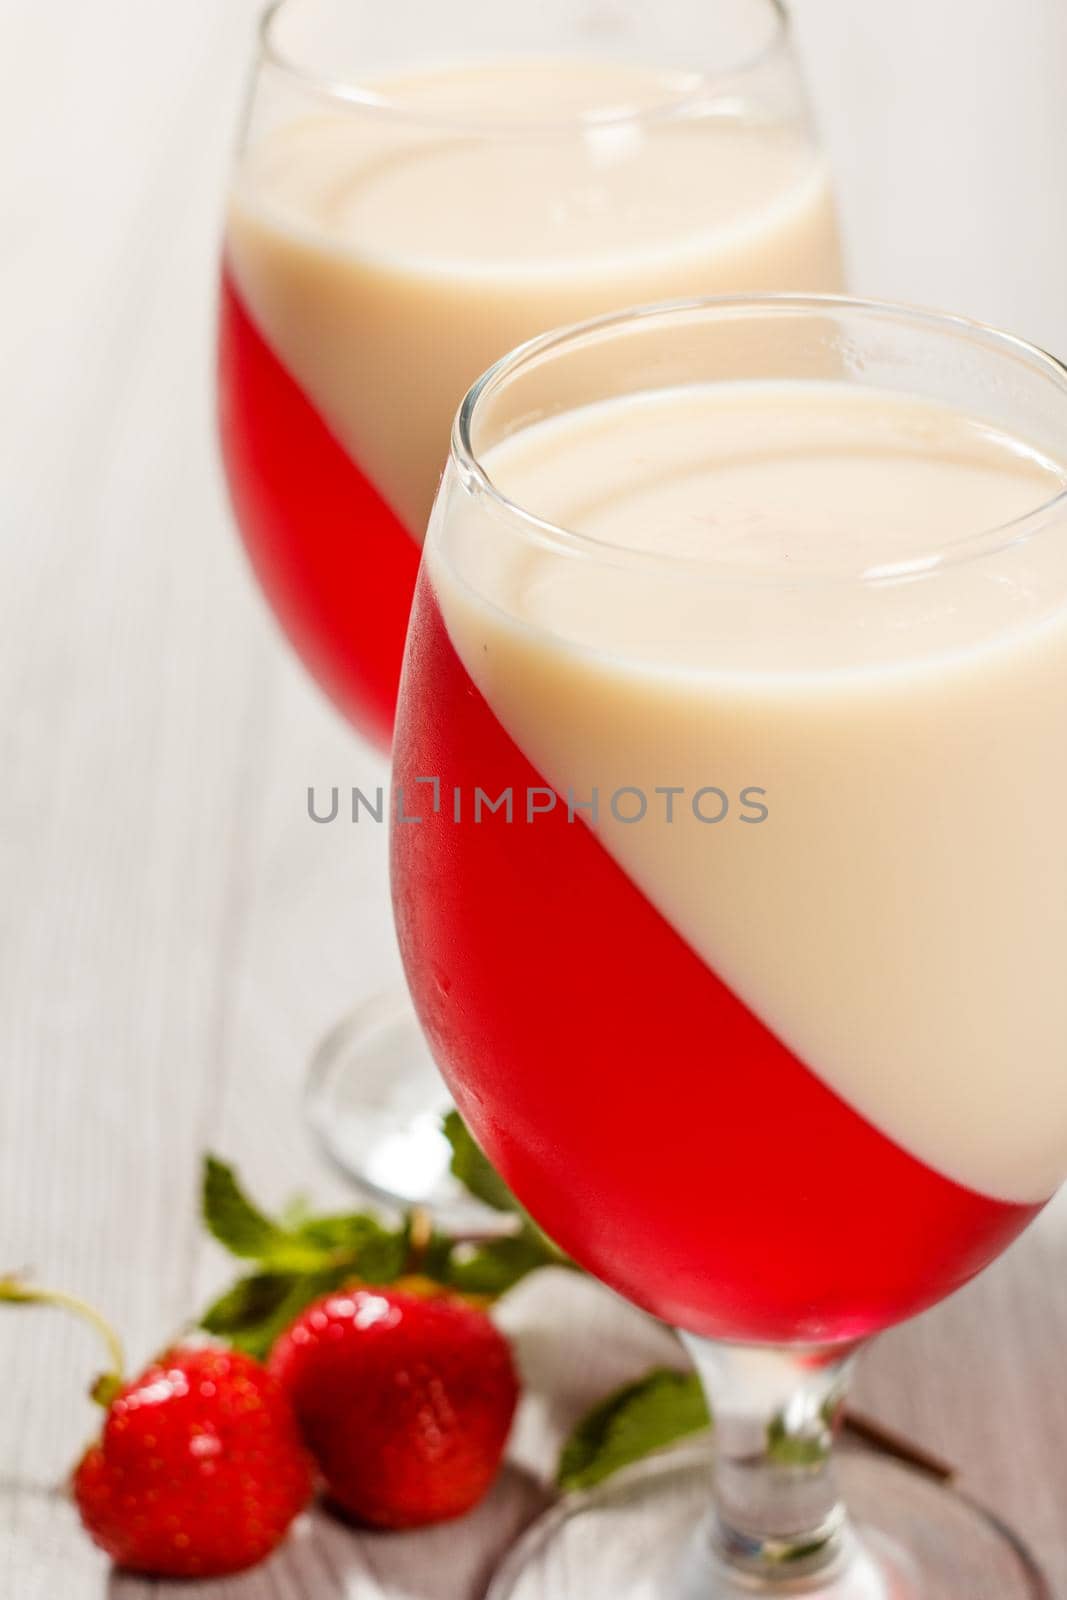 Cherry and milk jelly in the glasses with mint leaves and strawberries on the background